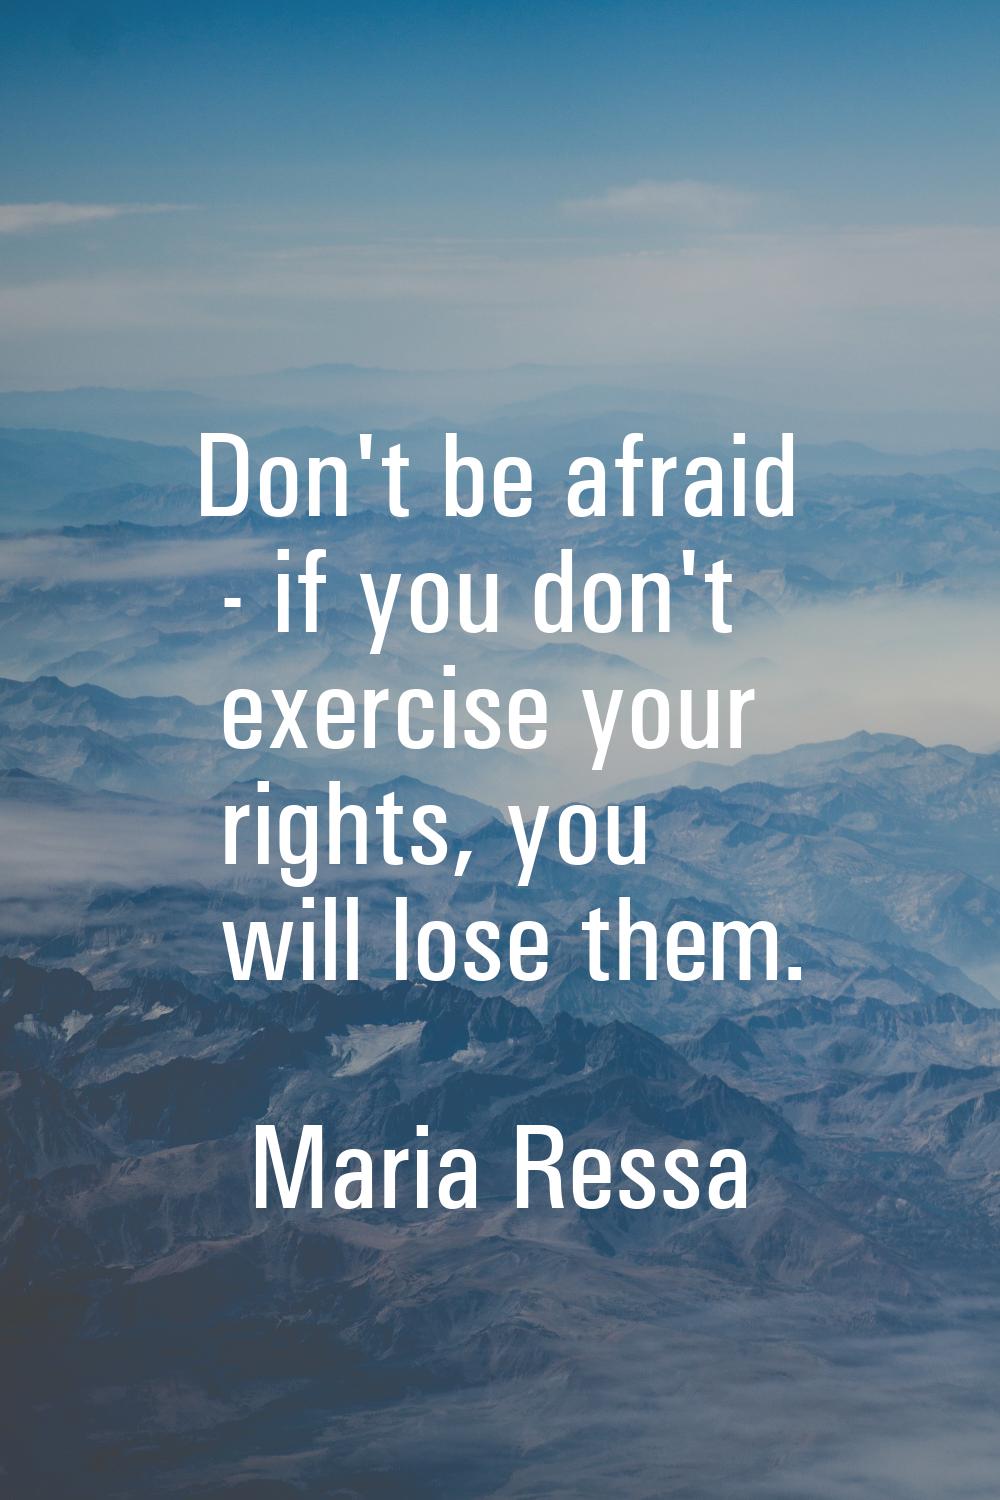 Don't be afraid - if you don't exercise your rights, you will lose them.